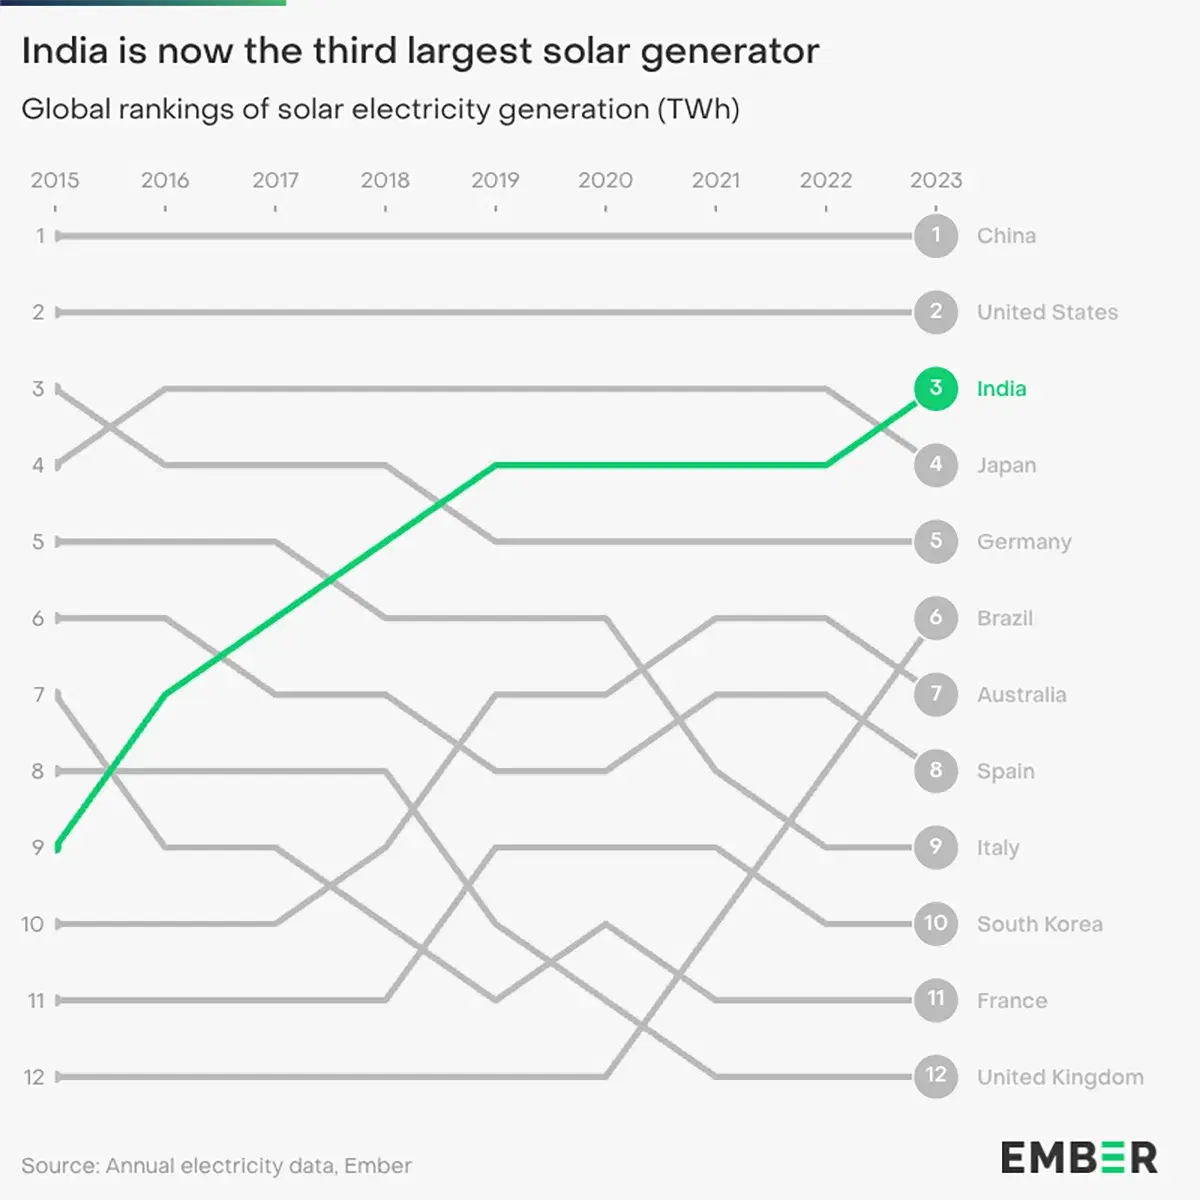 India is now the World's Third Largest Solar Generator